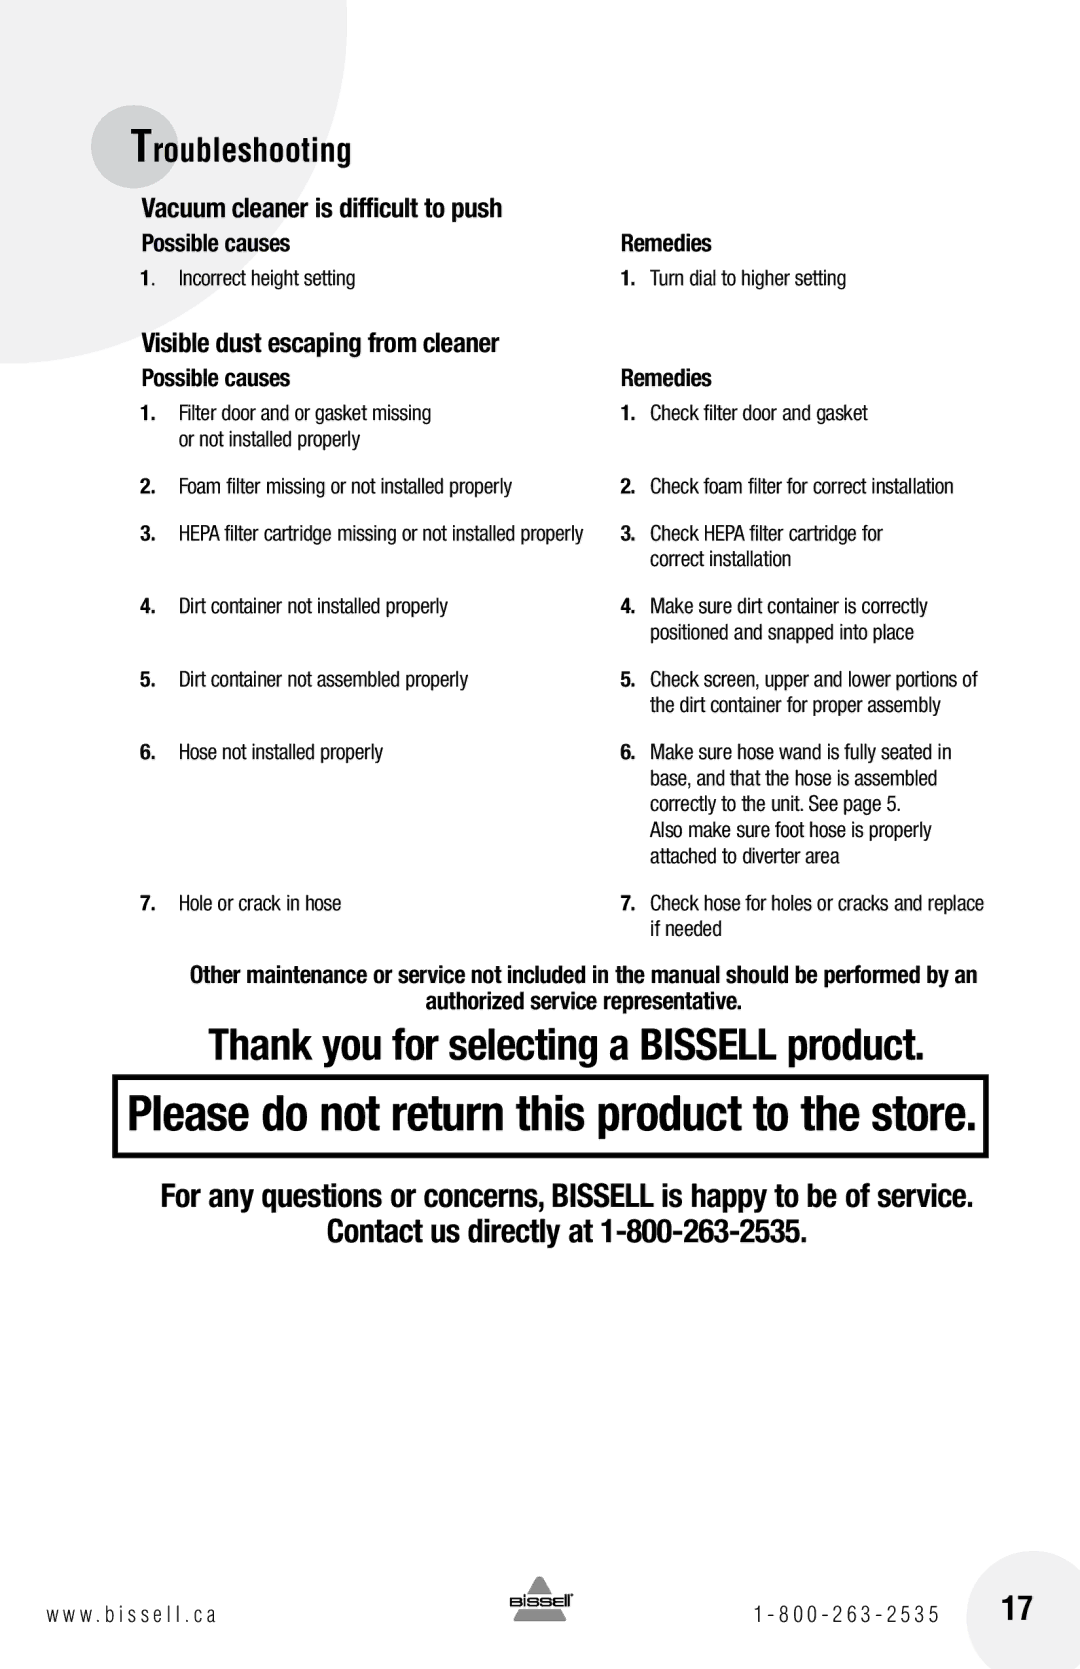 Bissell 16N5 warranty Vacuum cleaner is difficult to push, Visible dust escaping from cleaner 